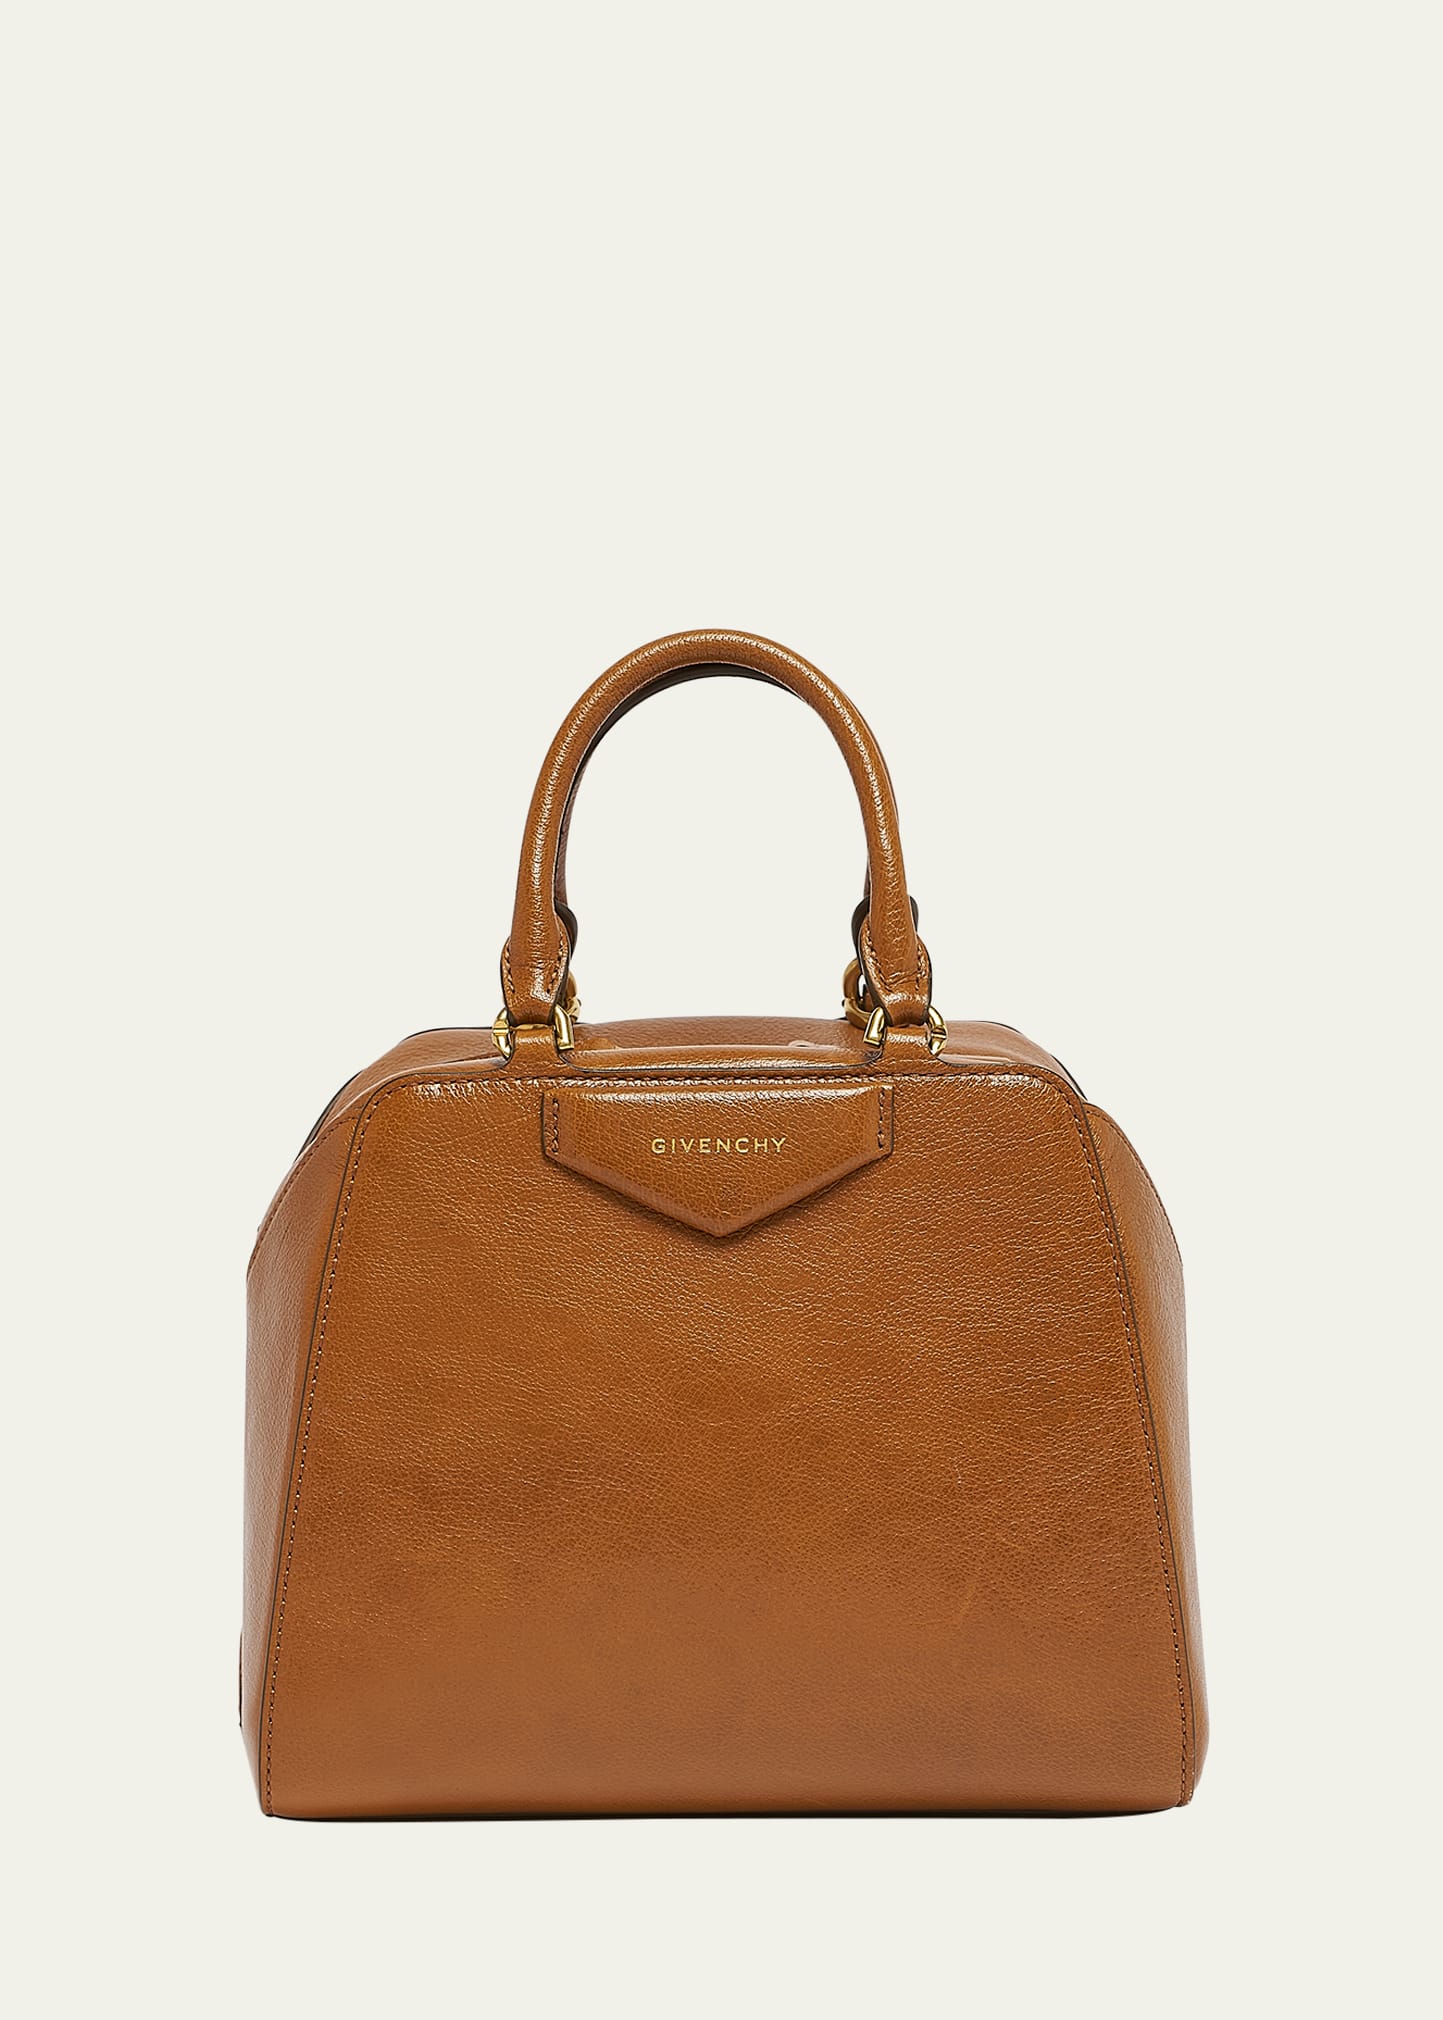 Givenchy Antigona Top-handle Bag In Shiny Tumbled Leather In Brown